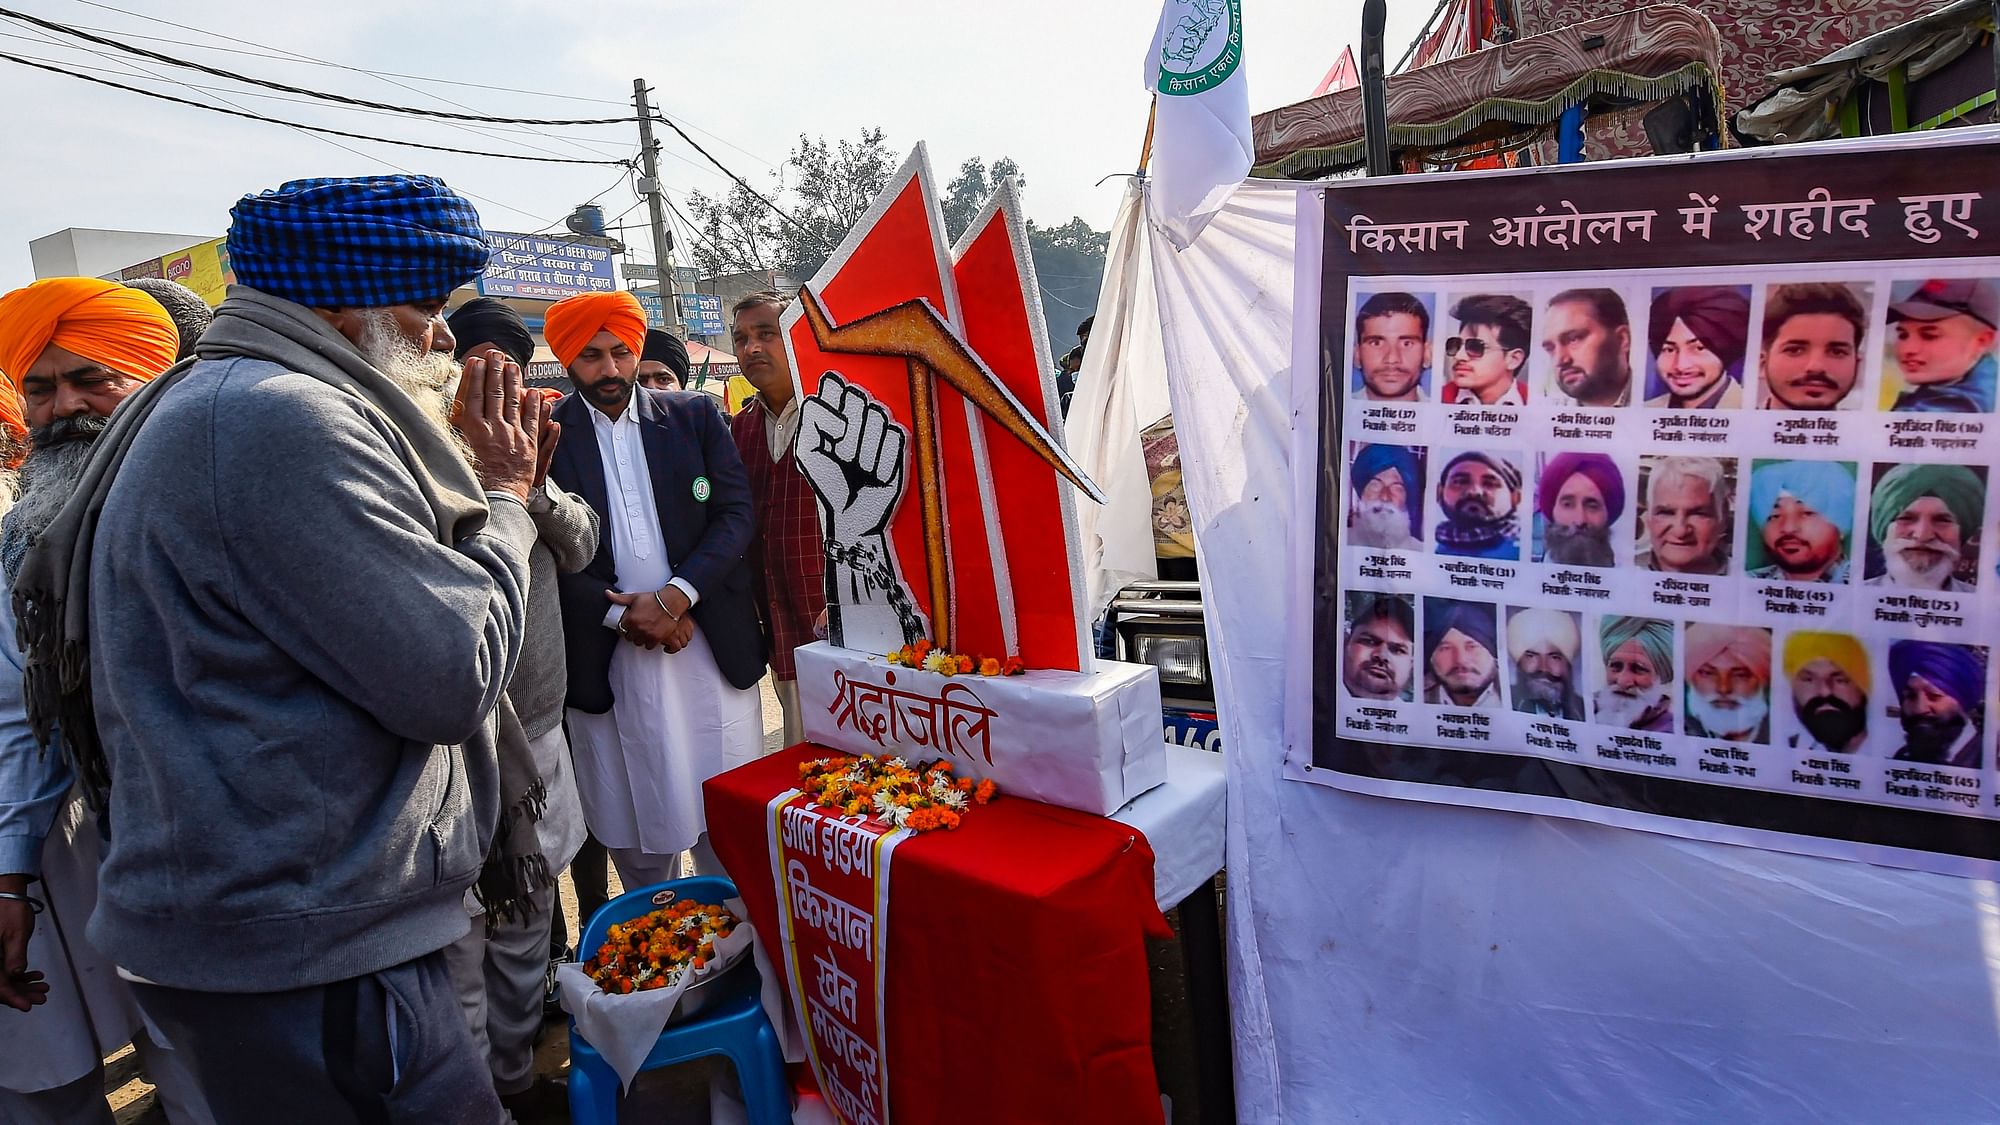 Farmers pay tribute to those who lost their lives during the farmers agitation, as they gather at Singhu border.